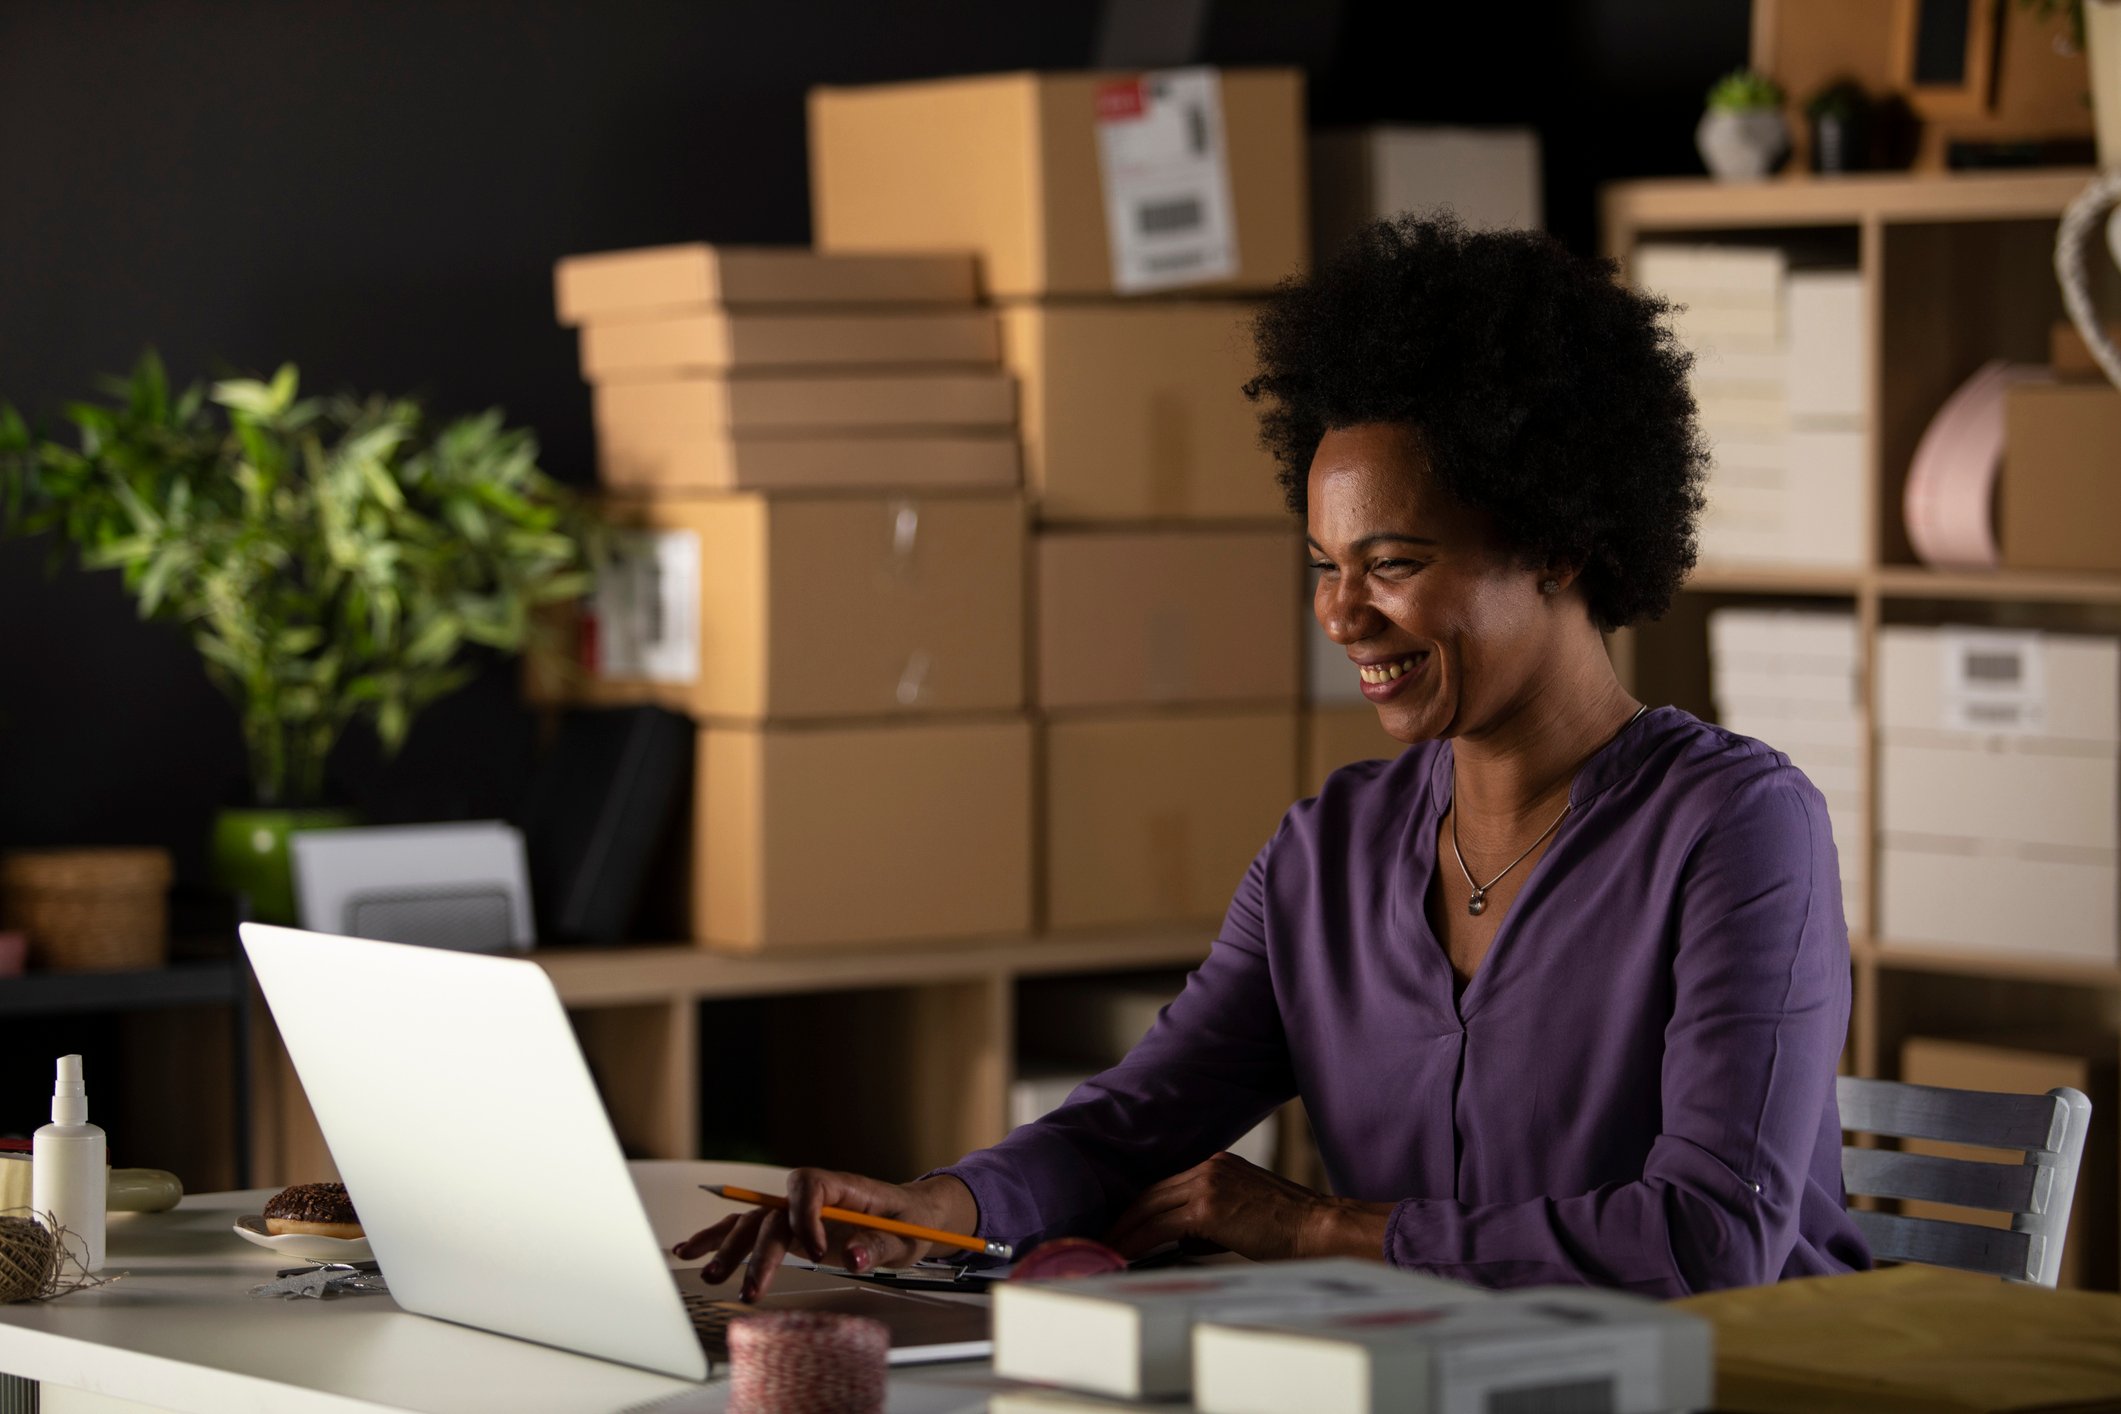 Woman smiling at laptop with boxes in background